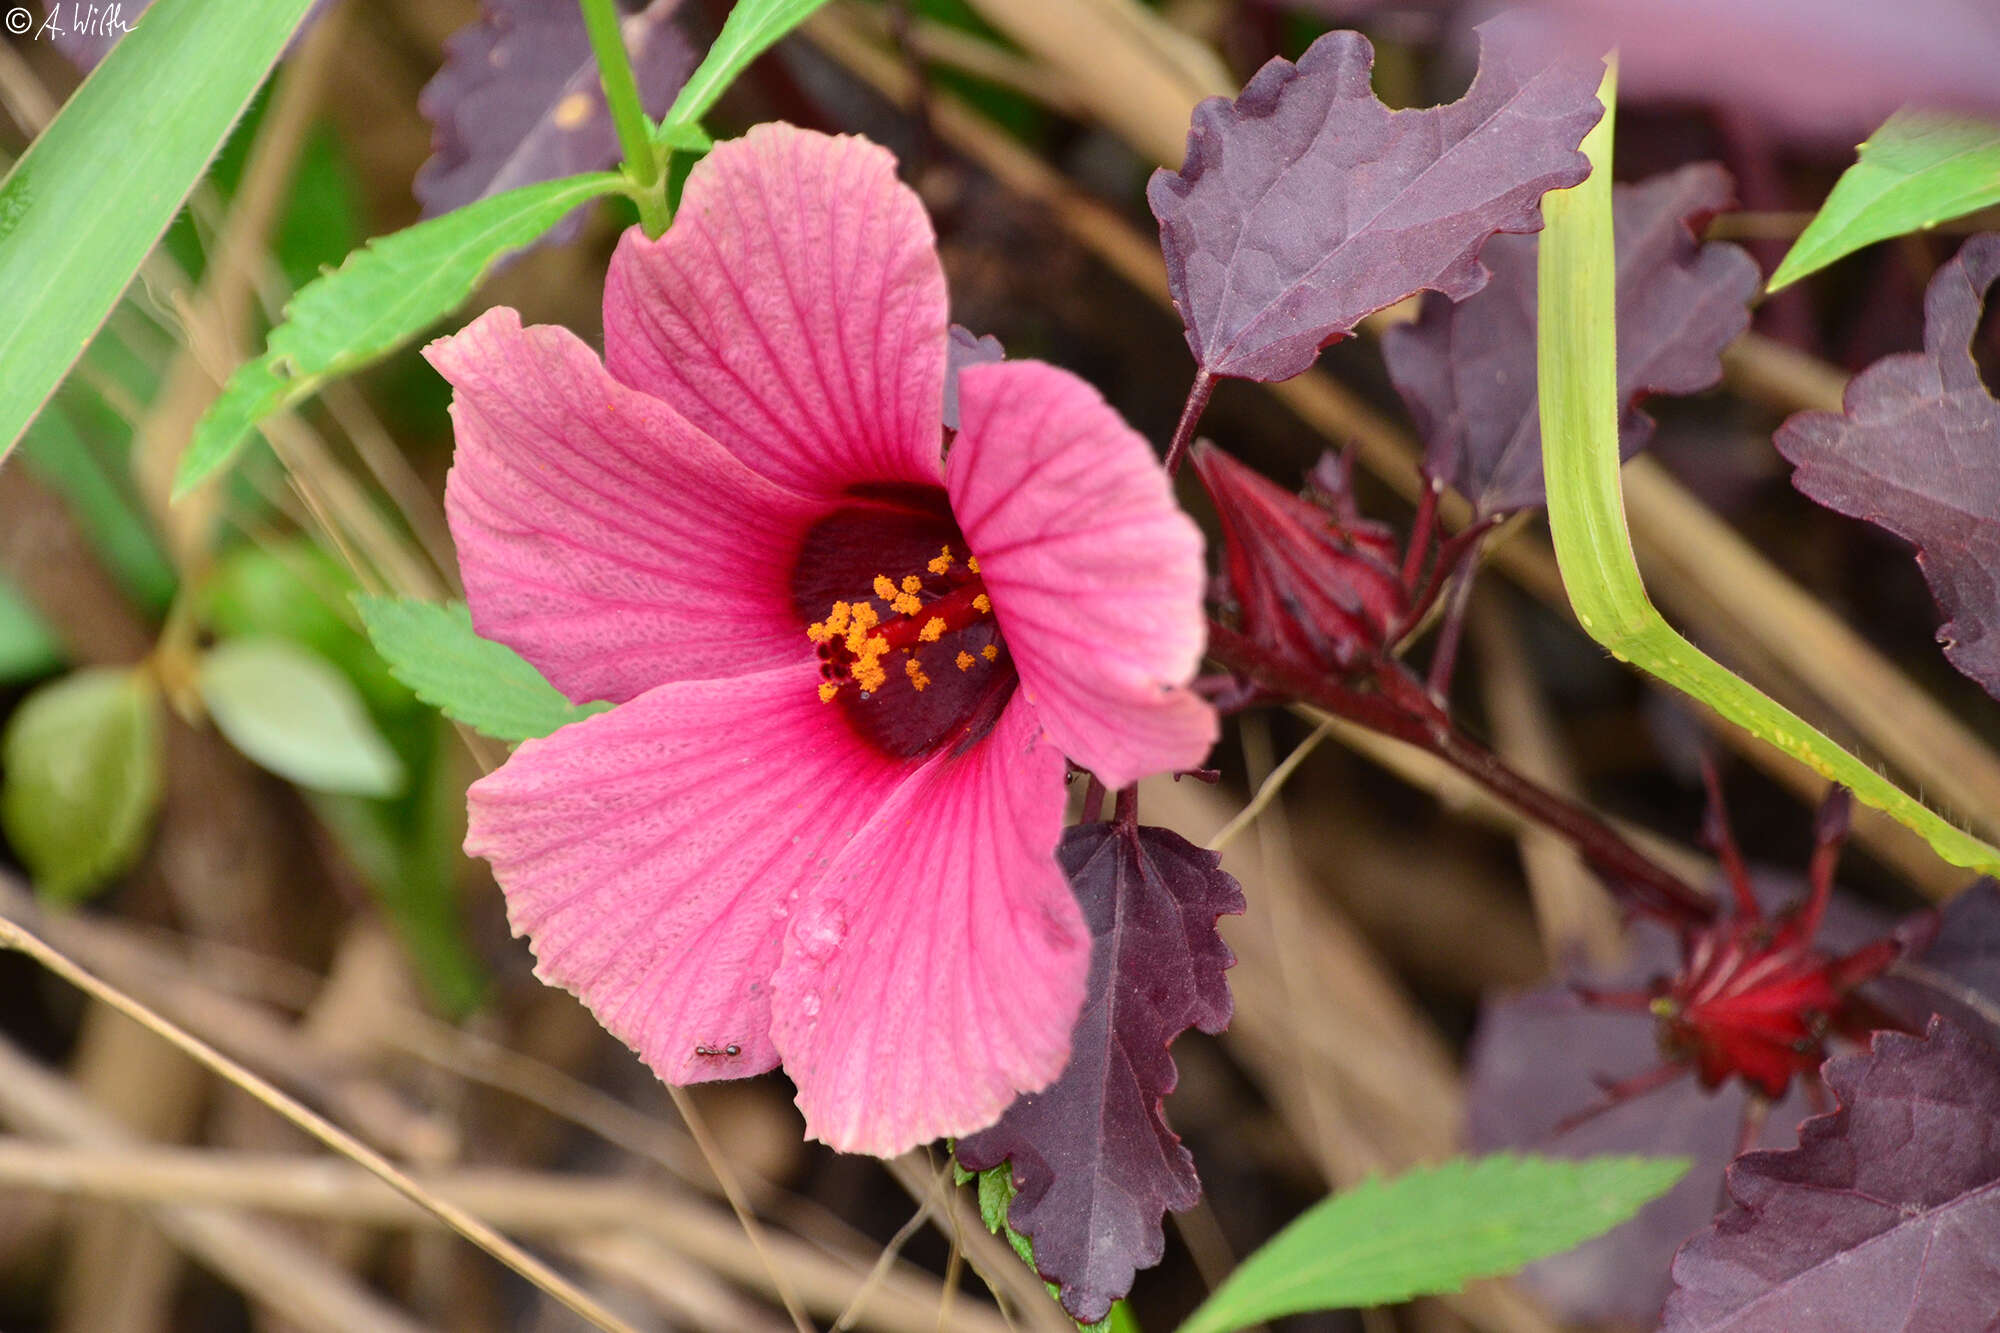 Image of African rosemallow